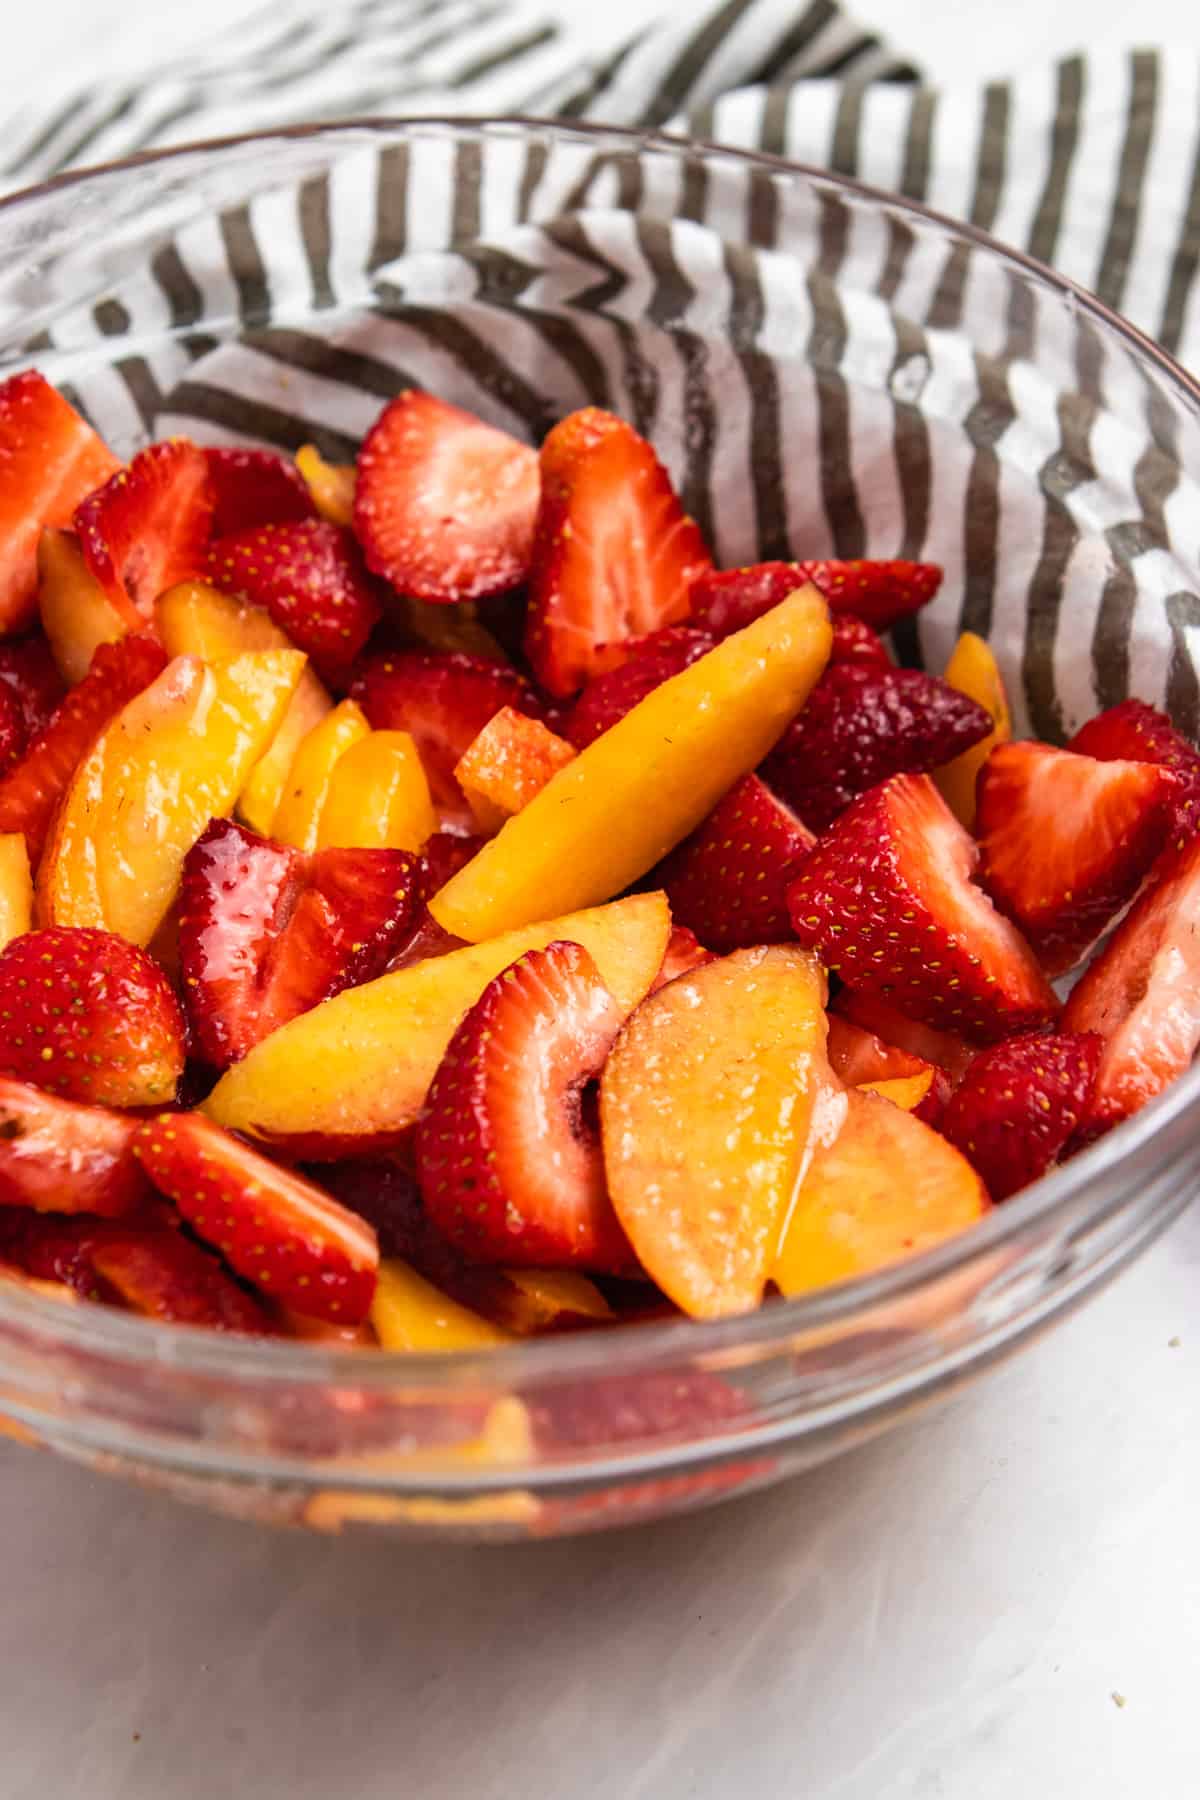 Peaches and strawberries with sugar in bowl.